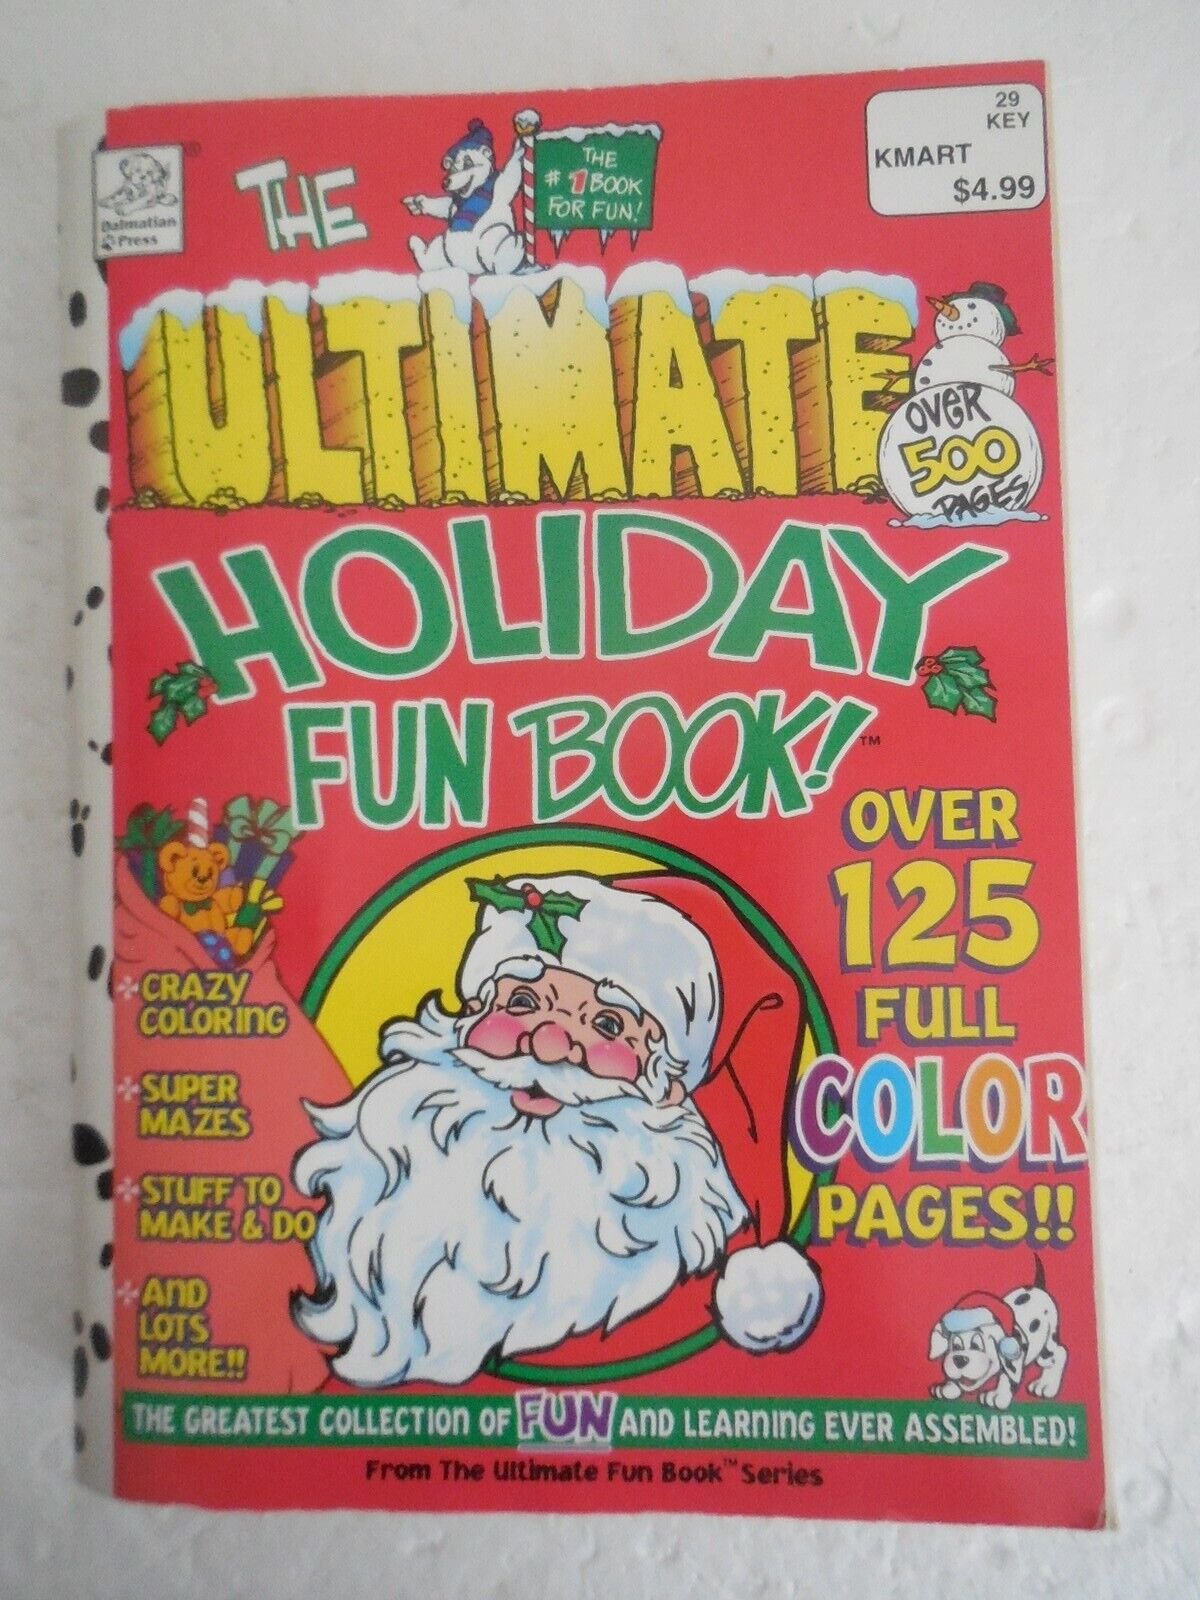 1998 The Ultimate Holiday Fun Book 512 Pages Coloring Mazes Stuff to Make & Do